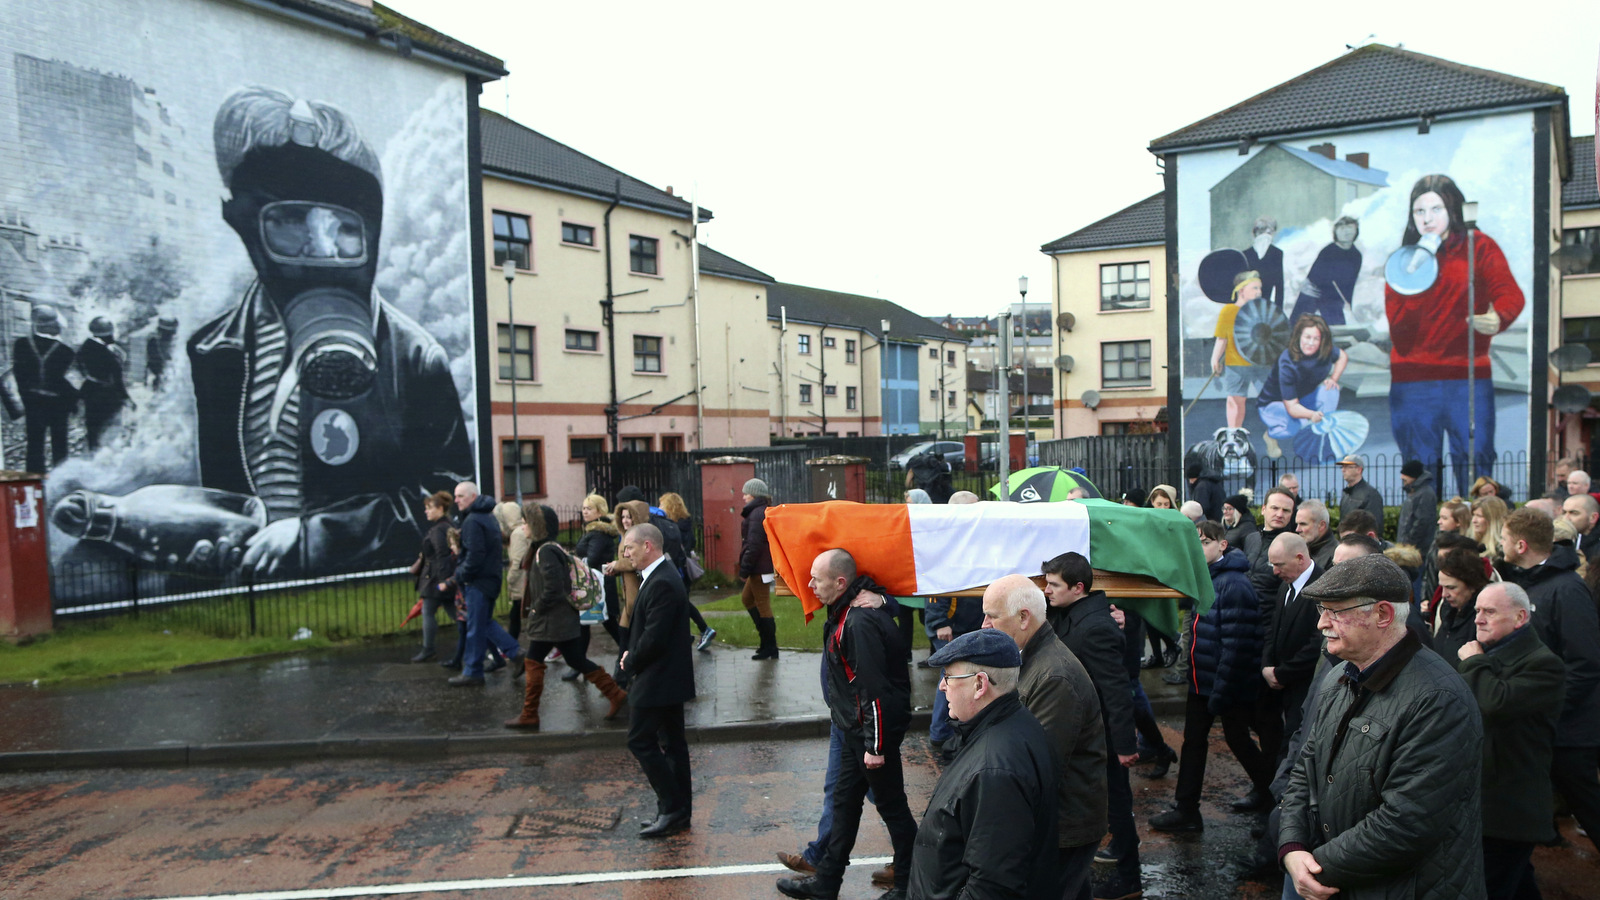 Irish Republicans carry the coffin of Martin McGuinness through the bogside area of Londonderry, Northern Ireland, Tuesday, March, 21, 2017. Martin McGuinness, the Irish Republican Army leader who led his underground, paramilitary movement toward reconciliation with Britain, and was Northern Ireland's deputy first minister for a decade in a power-sharing government, has died, his Sinn Fein party announced Tuesday on Twitter. He was 66. (AP/Peter Morrison)